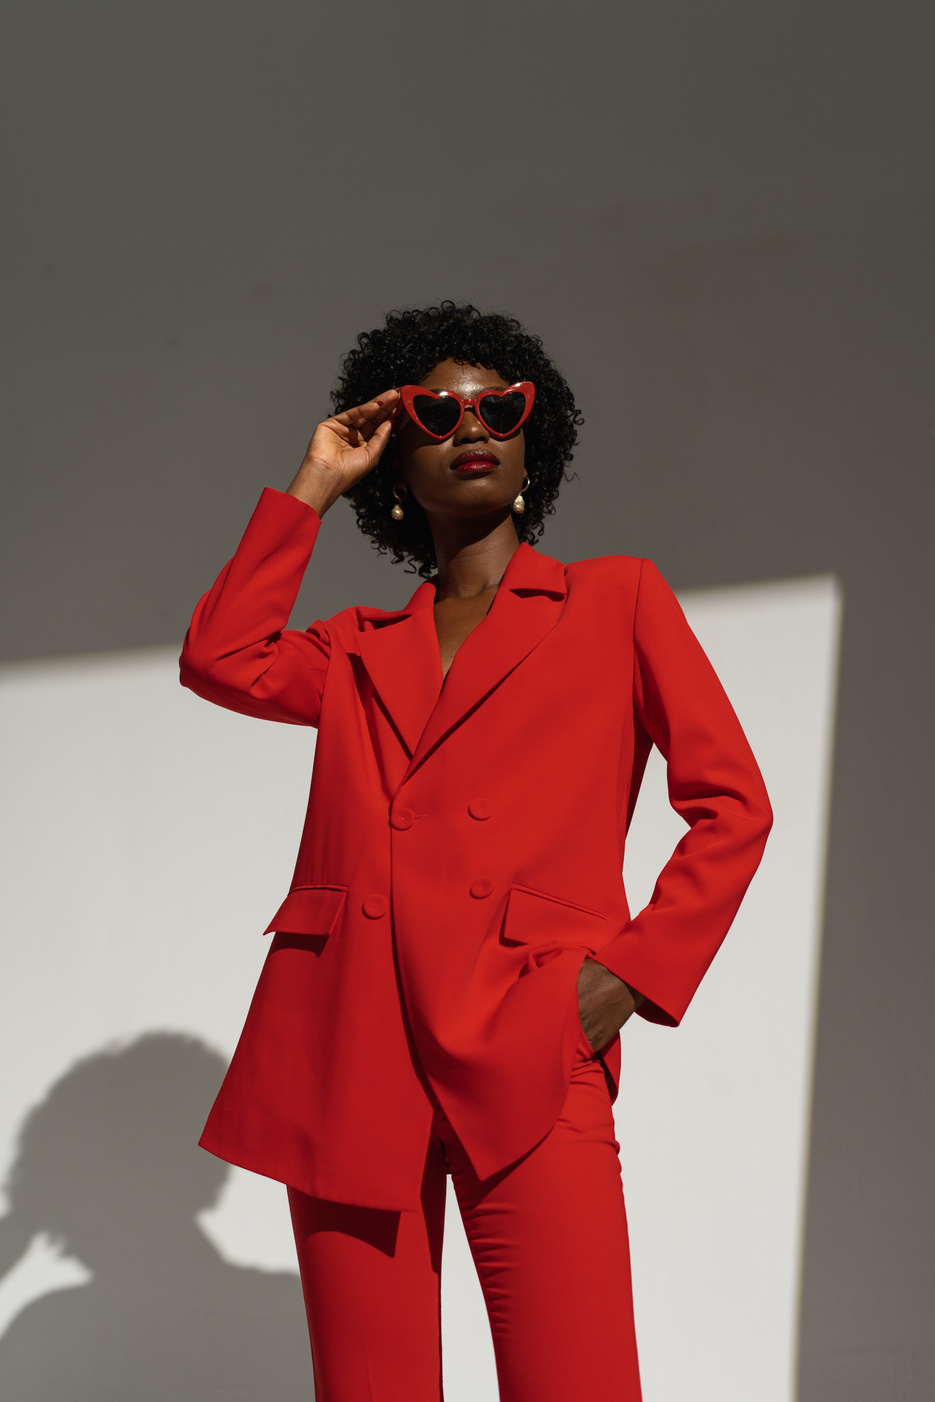 Fashionable Woman in Red Sunglasses and Suit